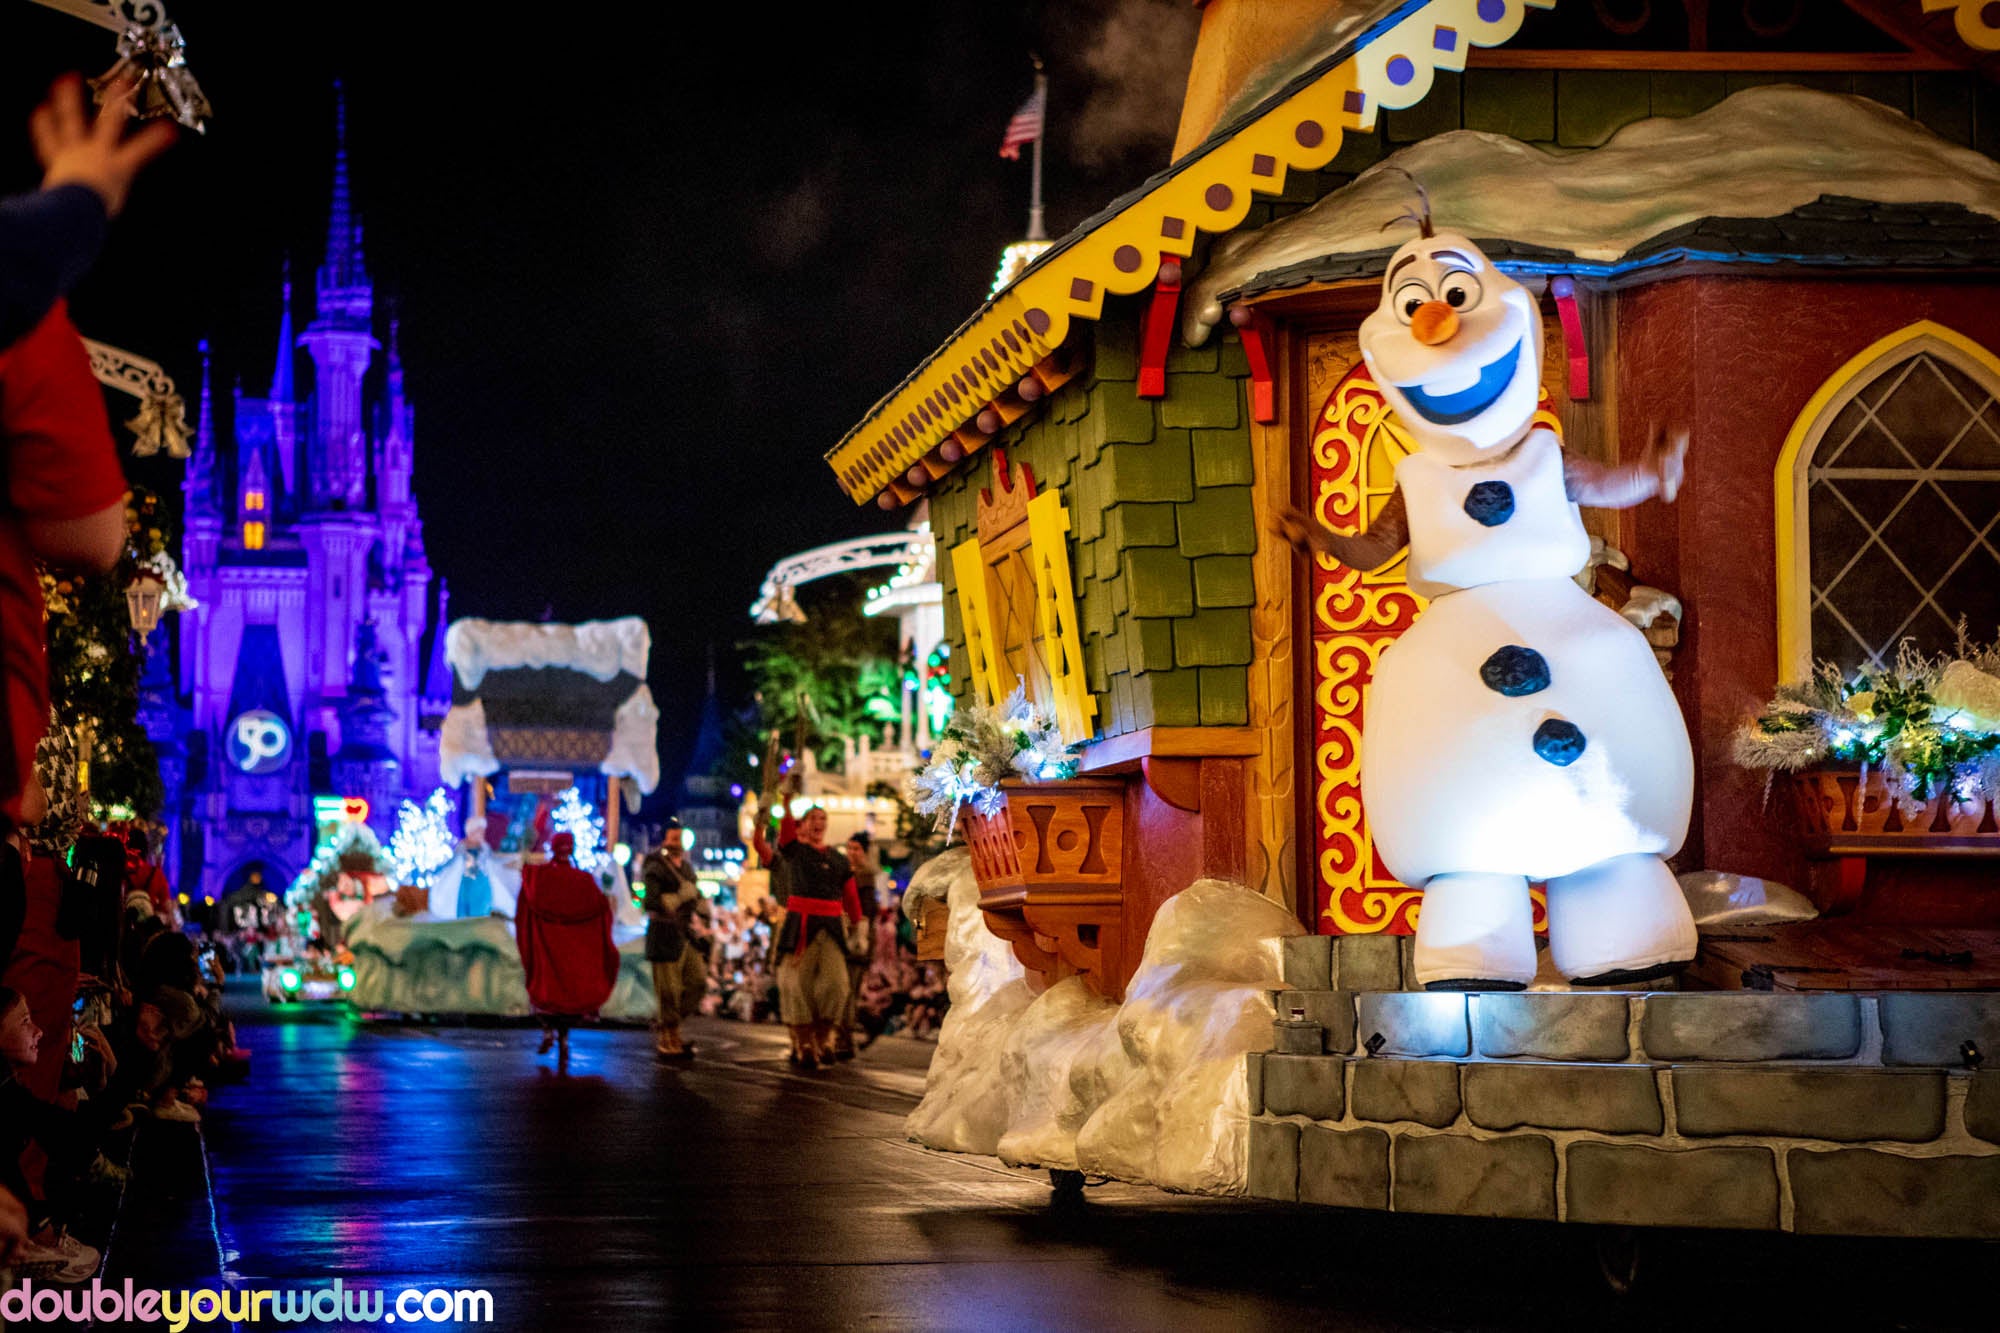 Olaf in the Christmas parade